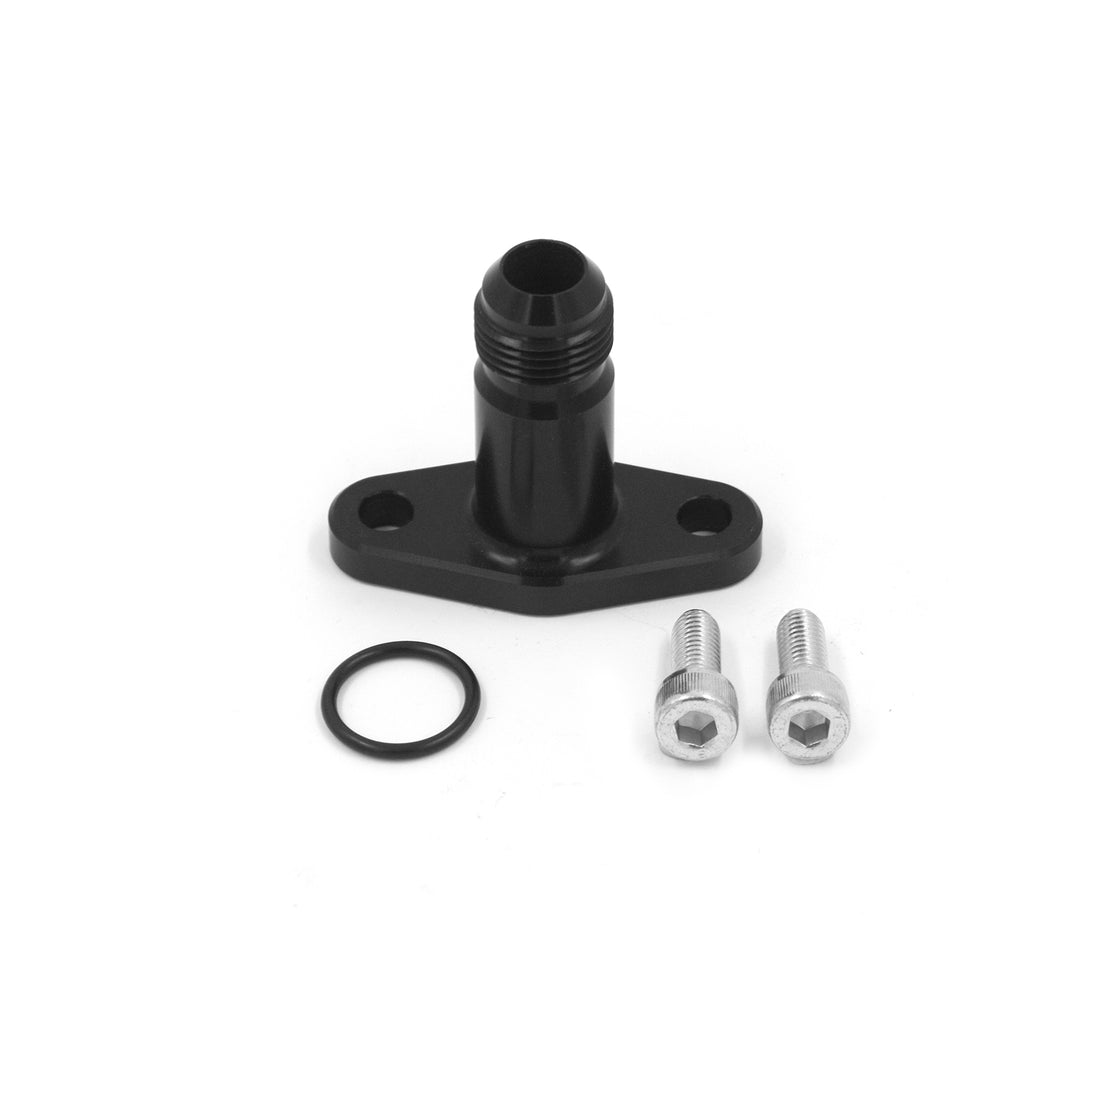 10AN Extended Turbo Oil Return Adaptor for FC RX7 13B